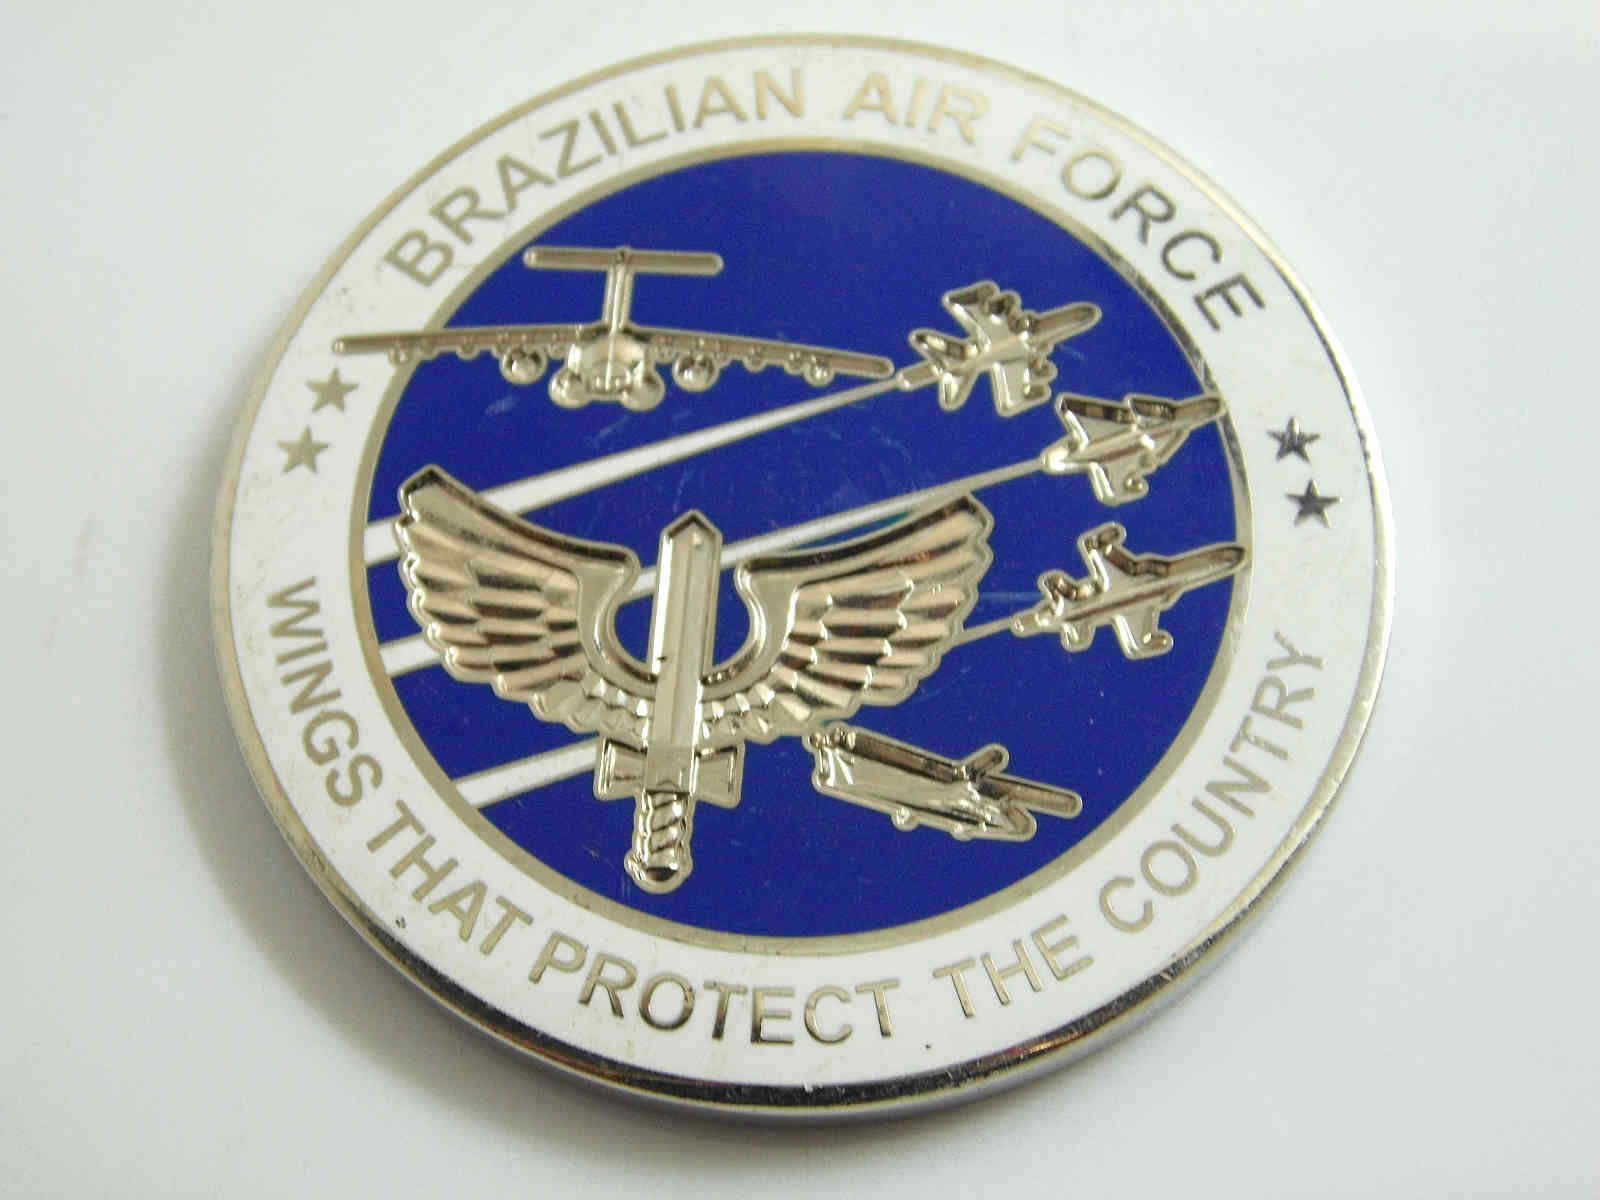 BRAZILIAN AIR FORCE WINGS THAT PROTECT THE COUNTRY CHALLENGE COIN